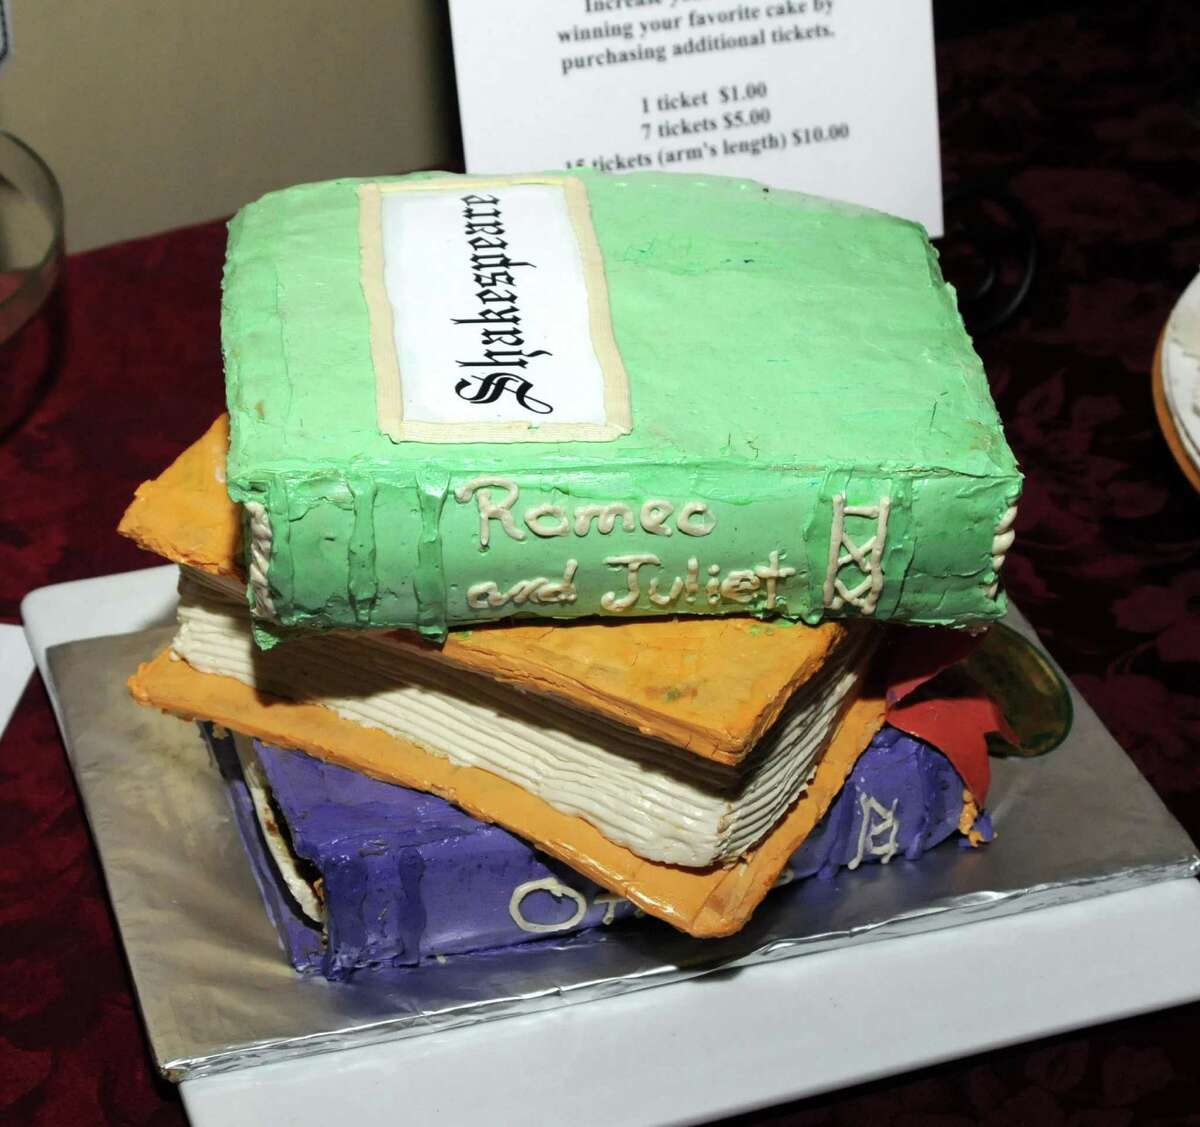 File photo from an event to benefit the Bethel Public Library Building Fund on May 6, 2010. Tickets were sold to those wanting to cast a vote for the cake that best represented Shakespeare. Loree's Catering of Bethel was the winner of the best Shakespeare cake pictured here.